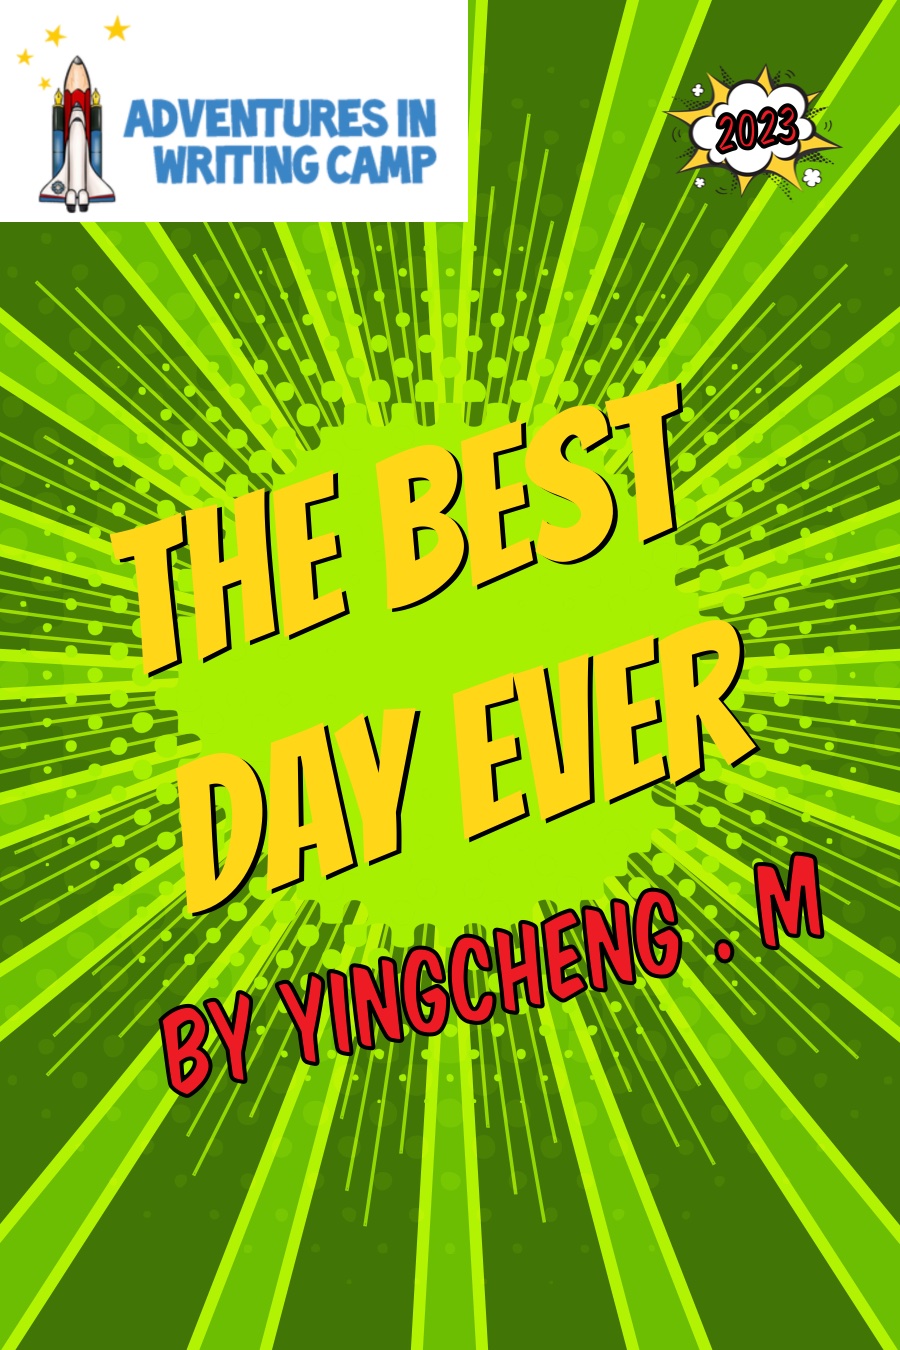 The Best Day Ever by Yingcheng M